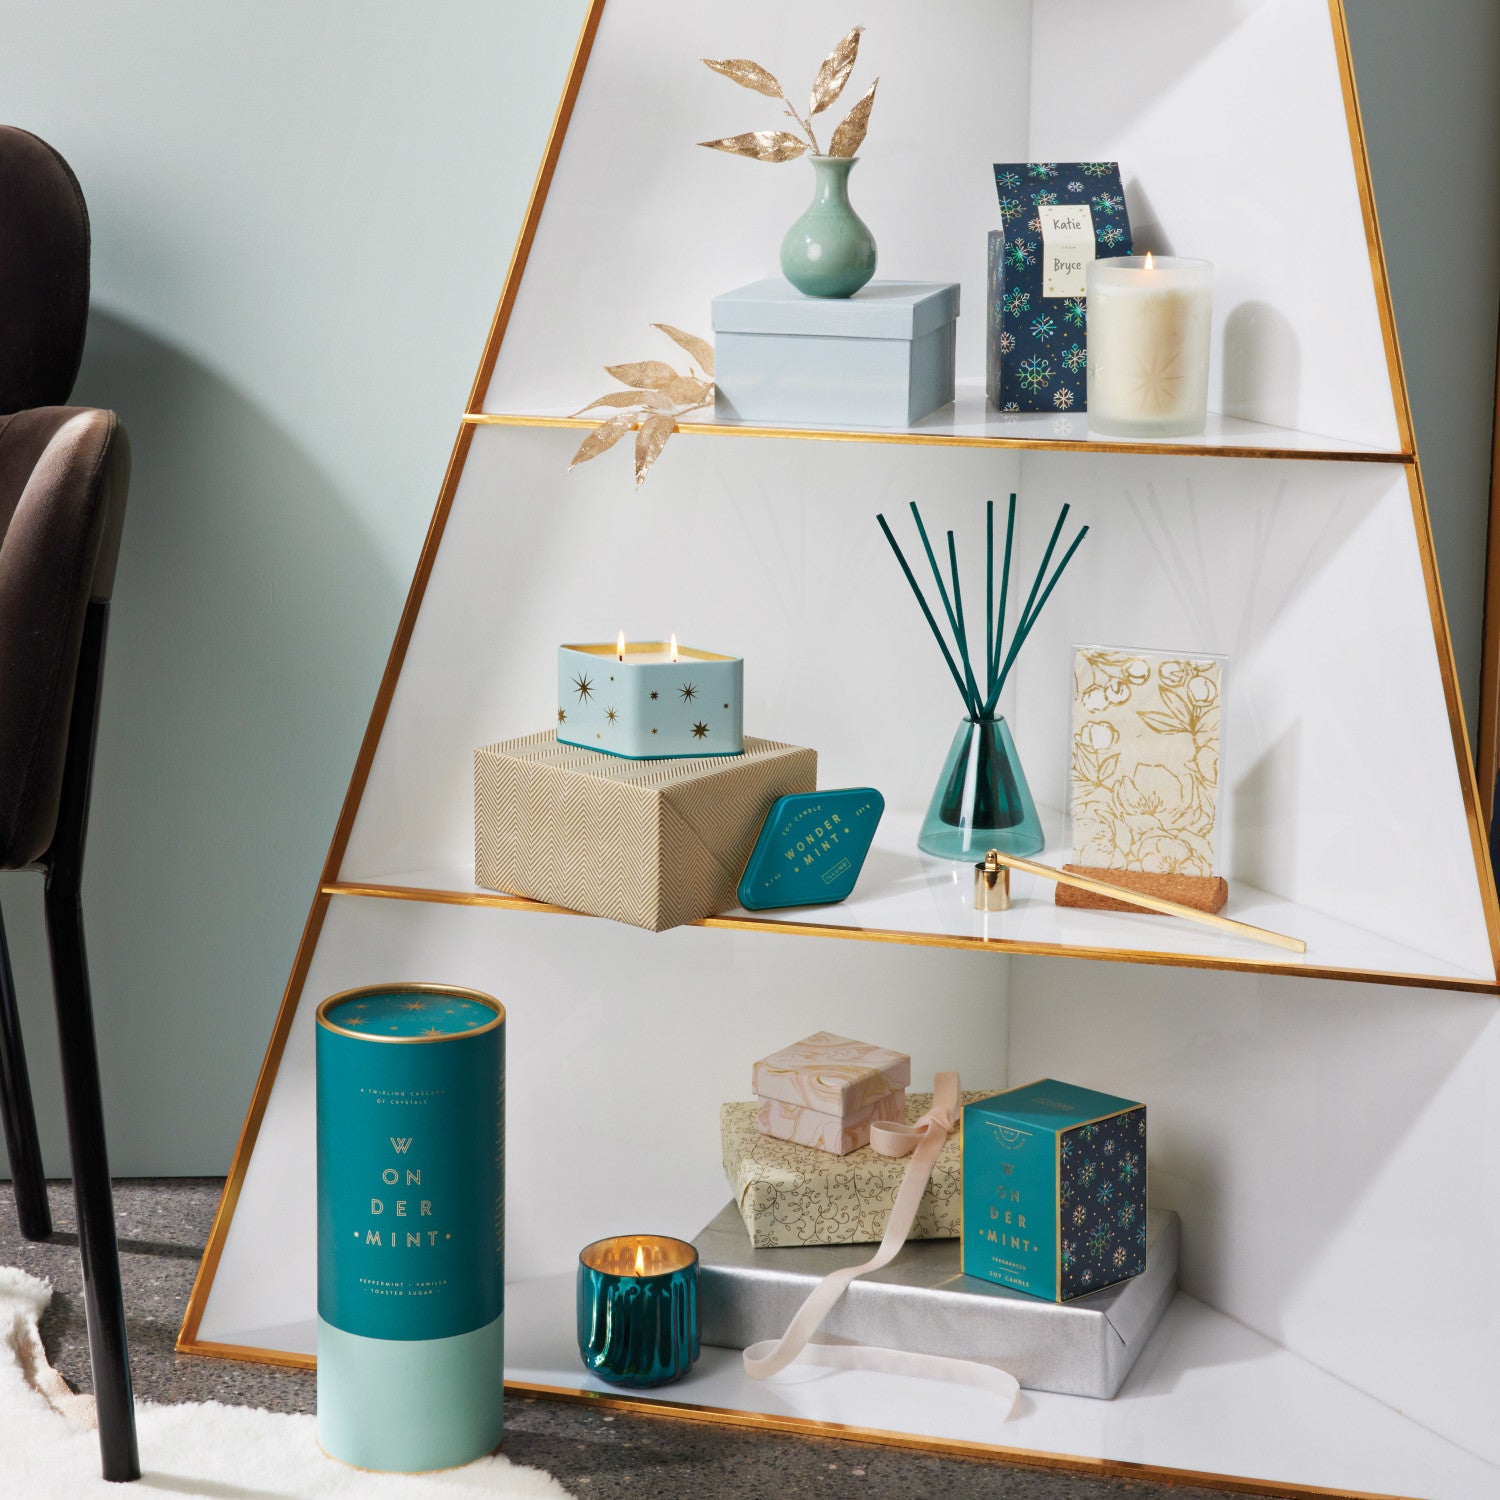 The Wondermint Winsome Reed Diffuser